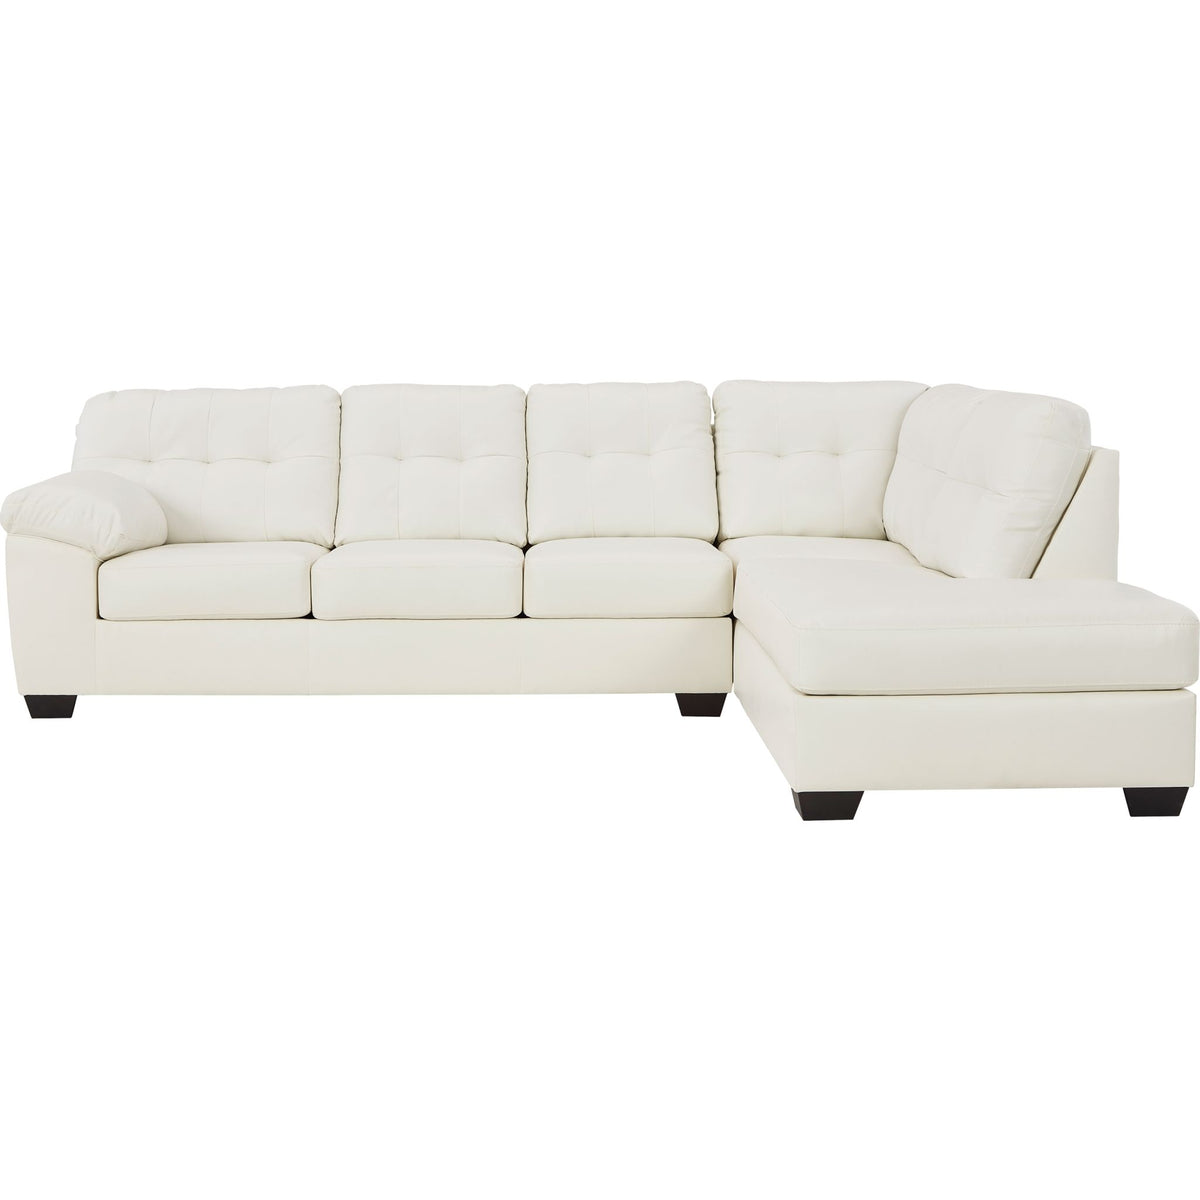 Donlen Sectional | Dufresne Furniture and Appliances